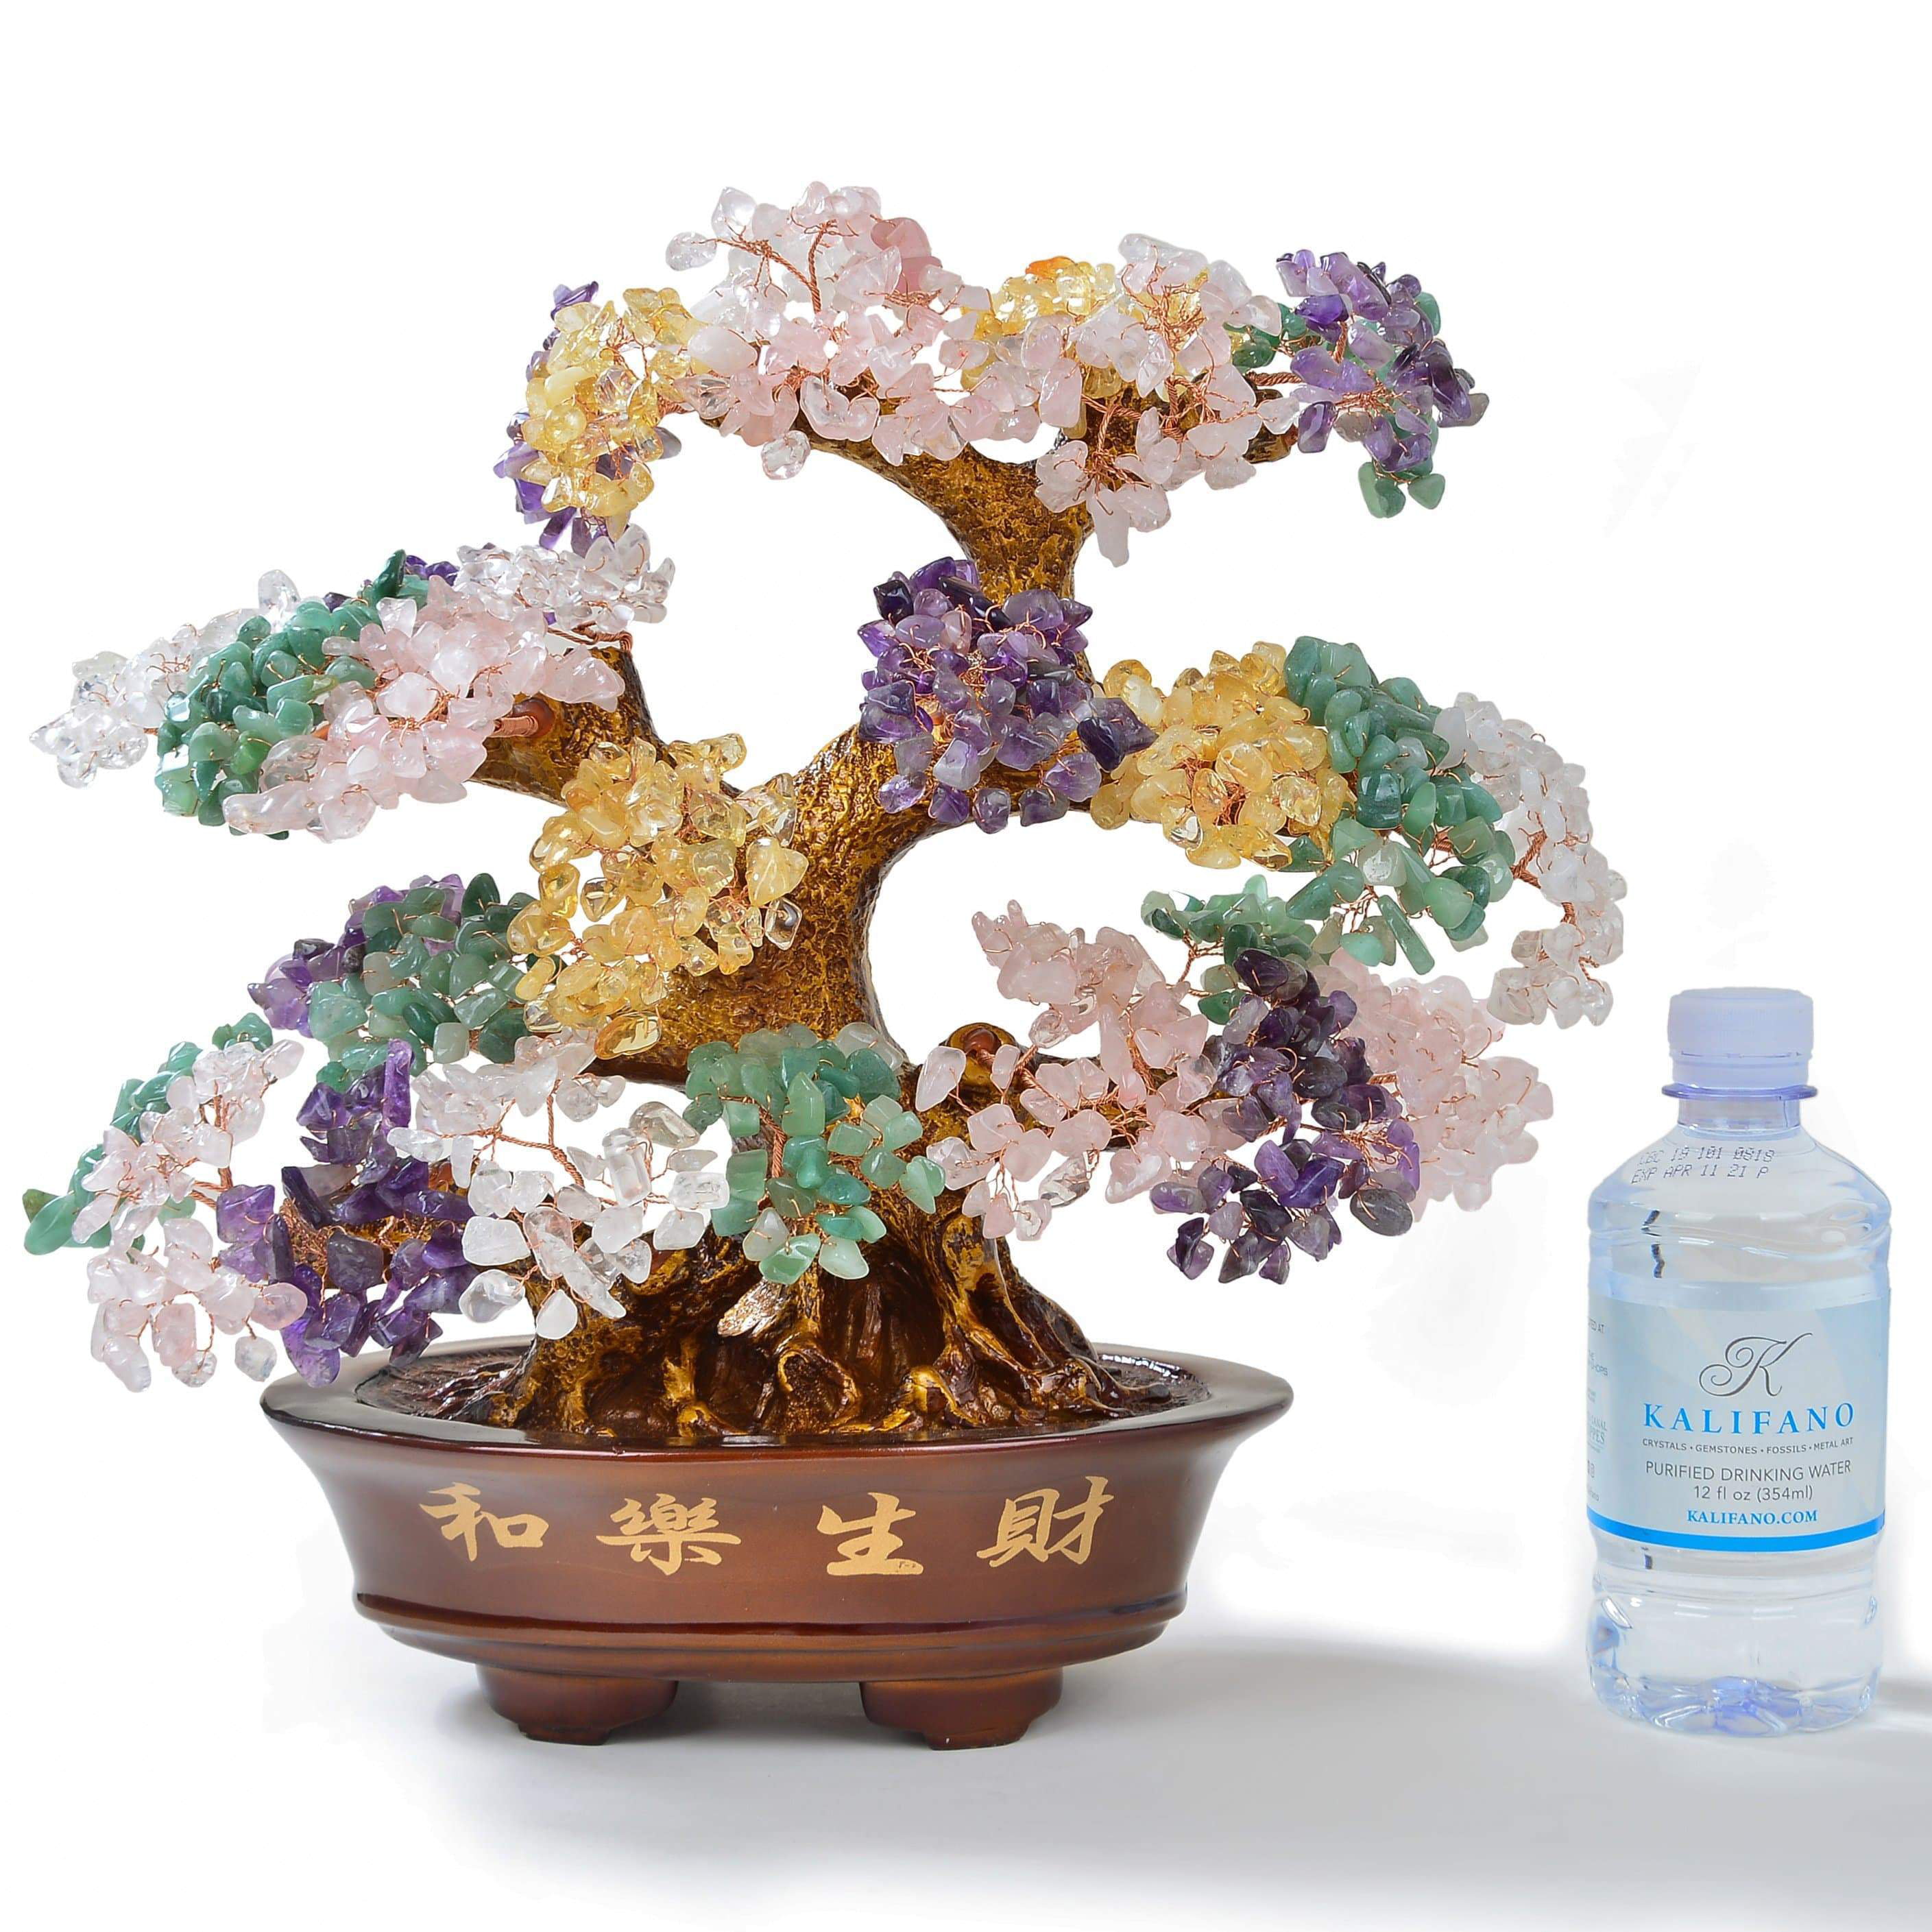 ZAICUS Amethyst Crystal Tree of Life Feng Shui Tree Stone Tree Bonsai Money Tree Purple Gemstone Tree for Good Luck Wealth & Prosperity Stones Spiritual Gift Home Decorations Copper Wire 10-12 Inch 